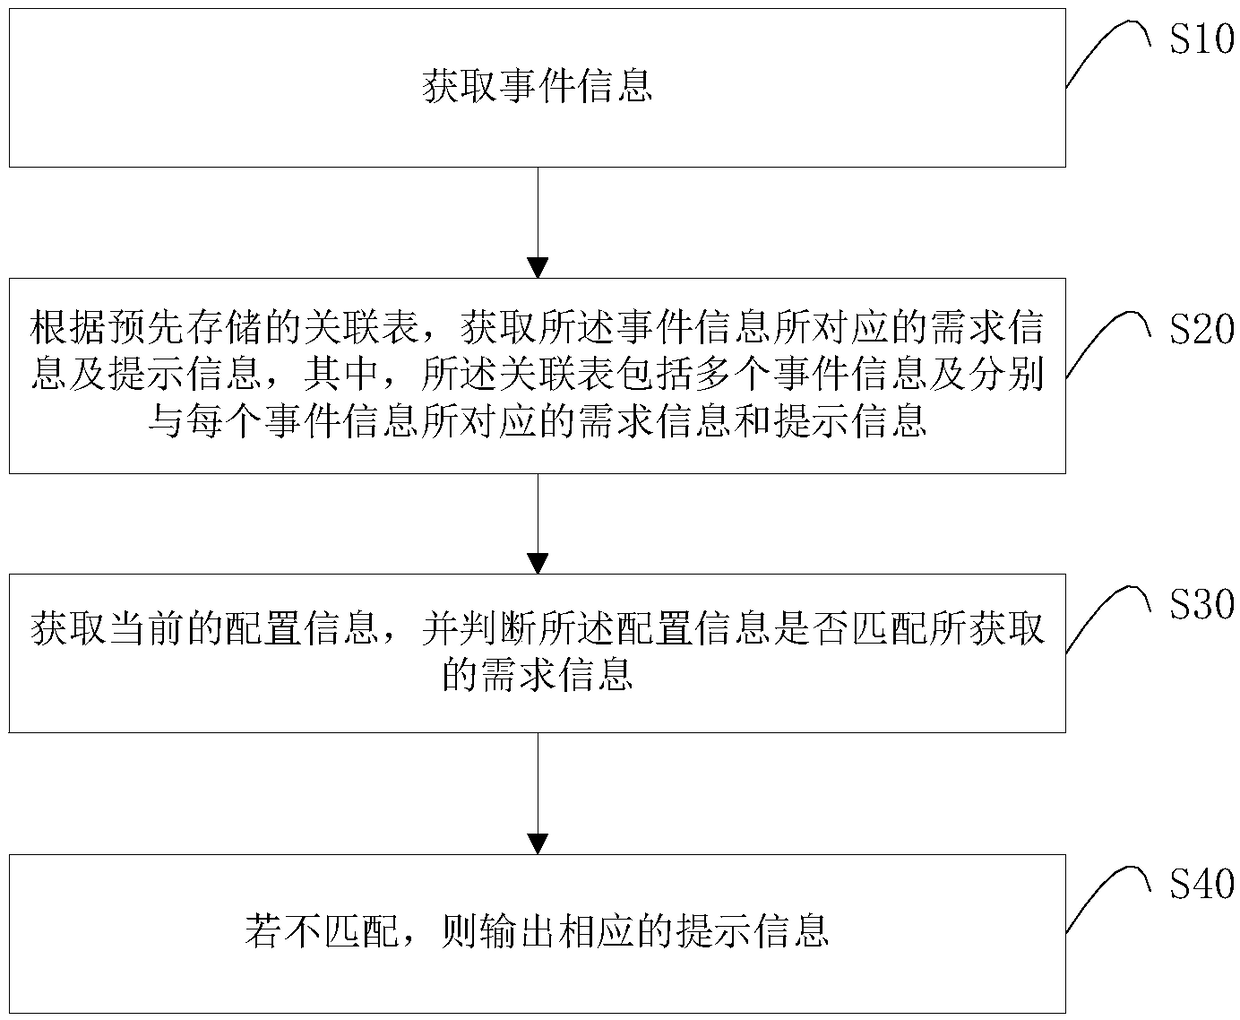 Implementation method for popularization and application of smart home